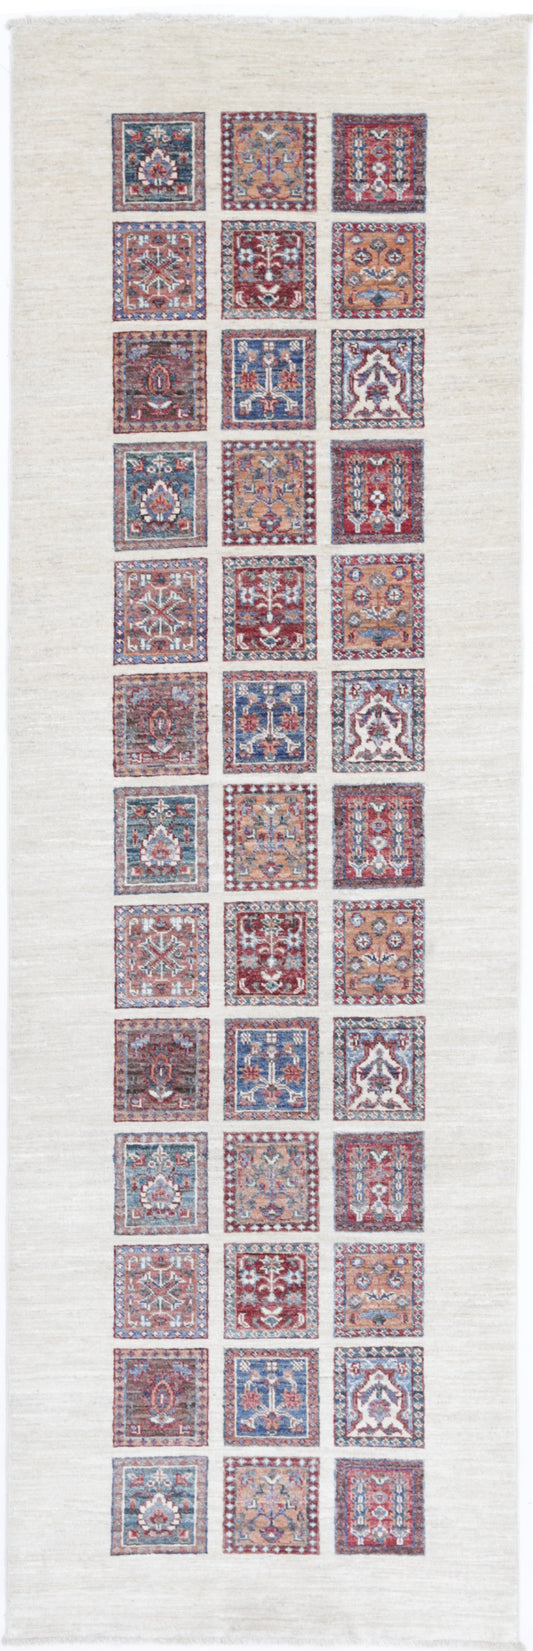 Traditional Hand Knotted Bakhtiari Farhan Wool Rug of Size 2'7'' X 8'10'' in Ivory and Multi Colors - Made in Afghanistan